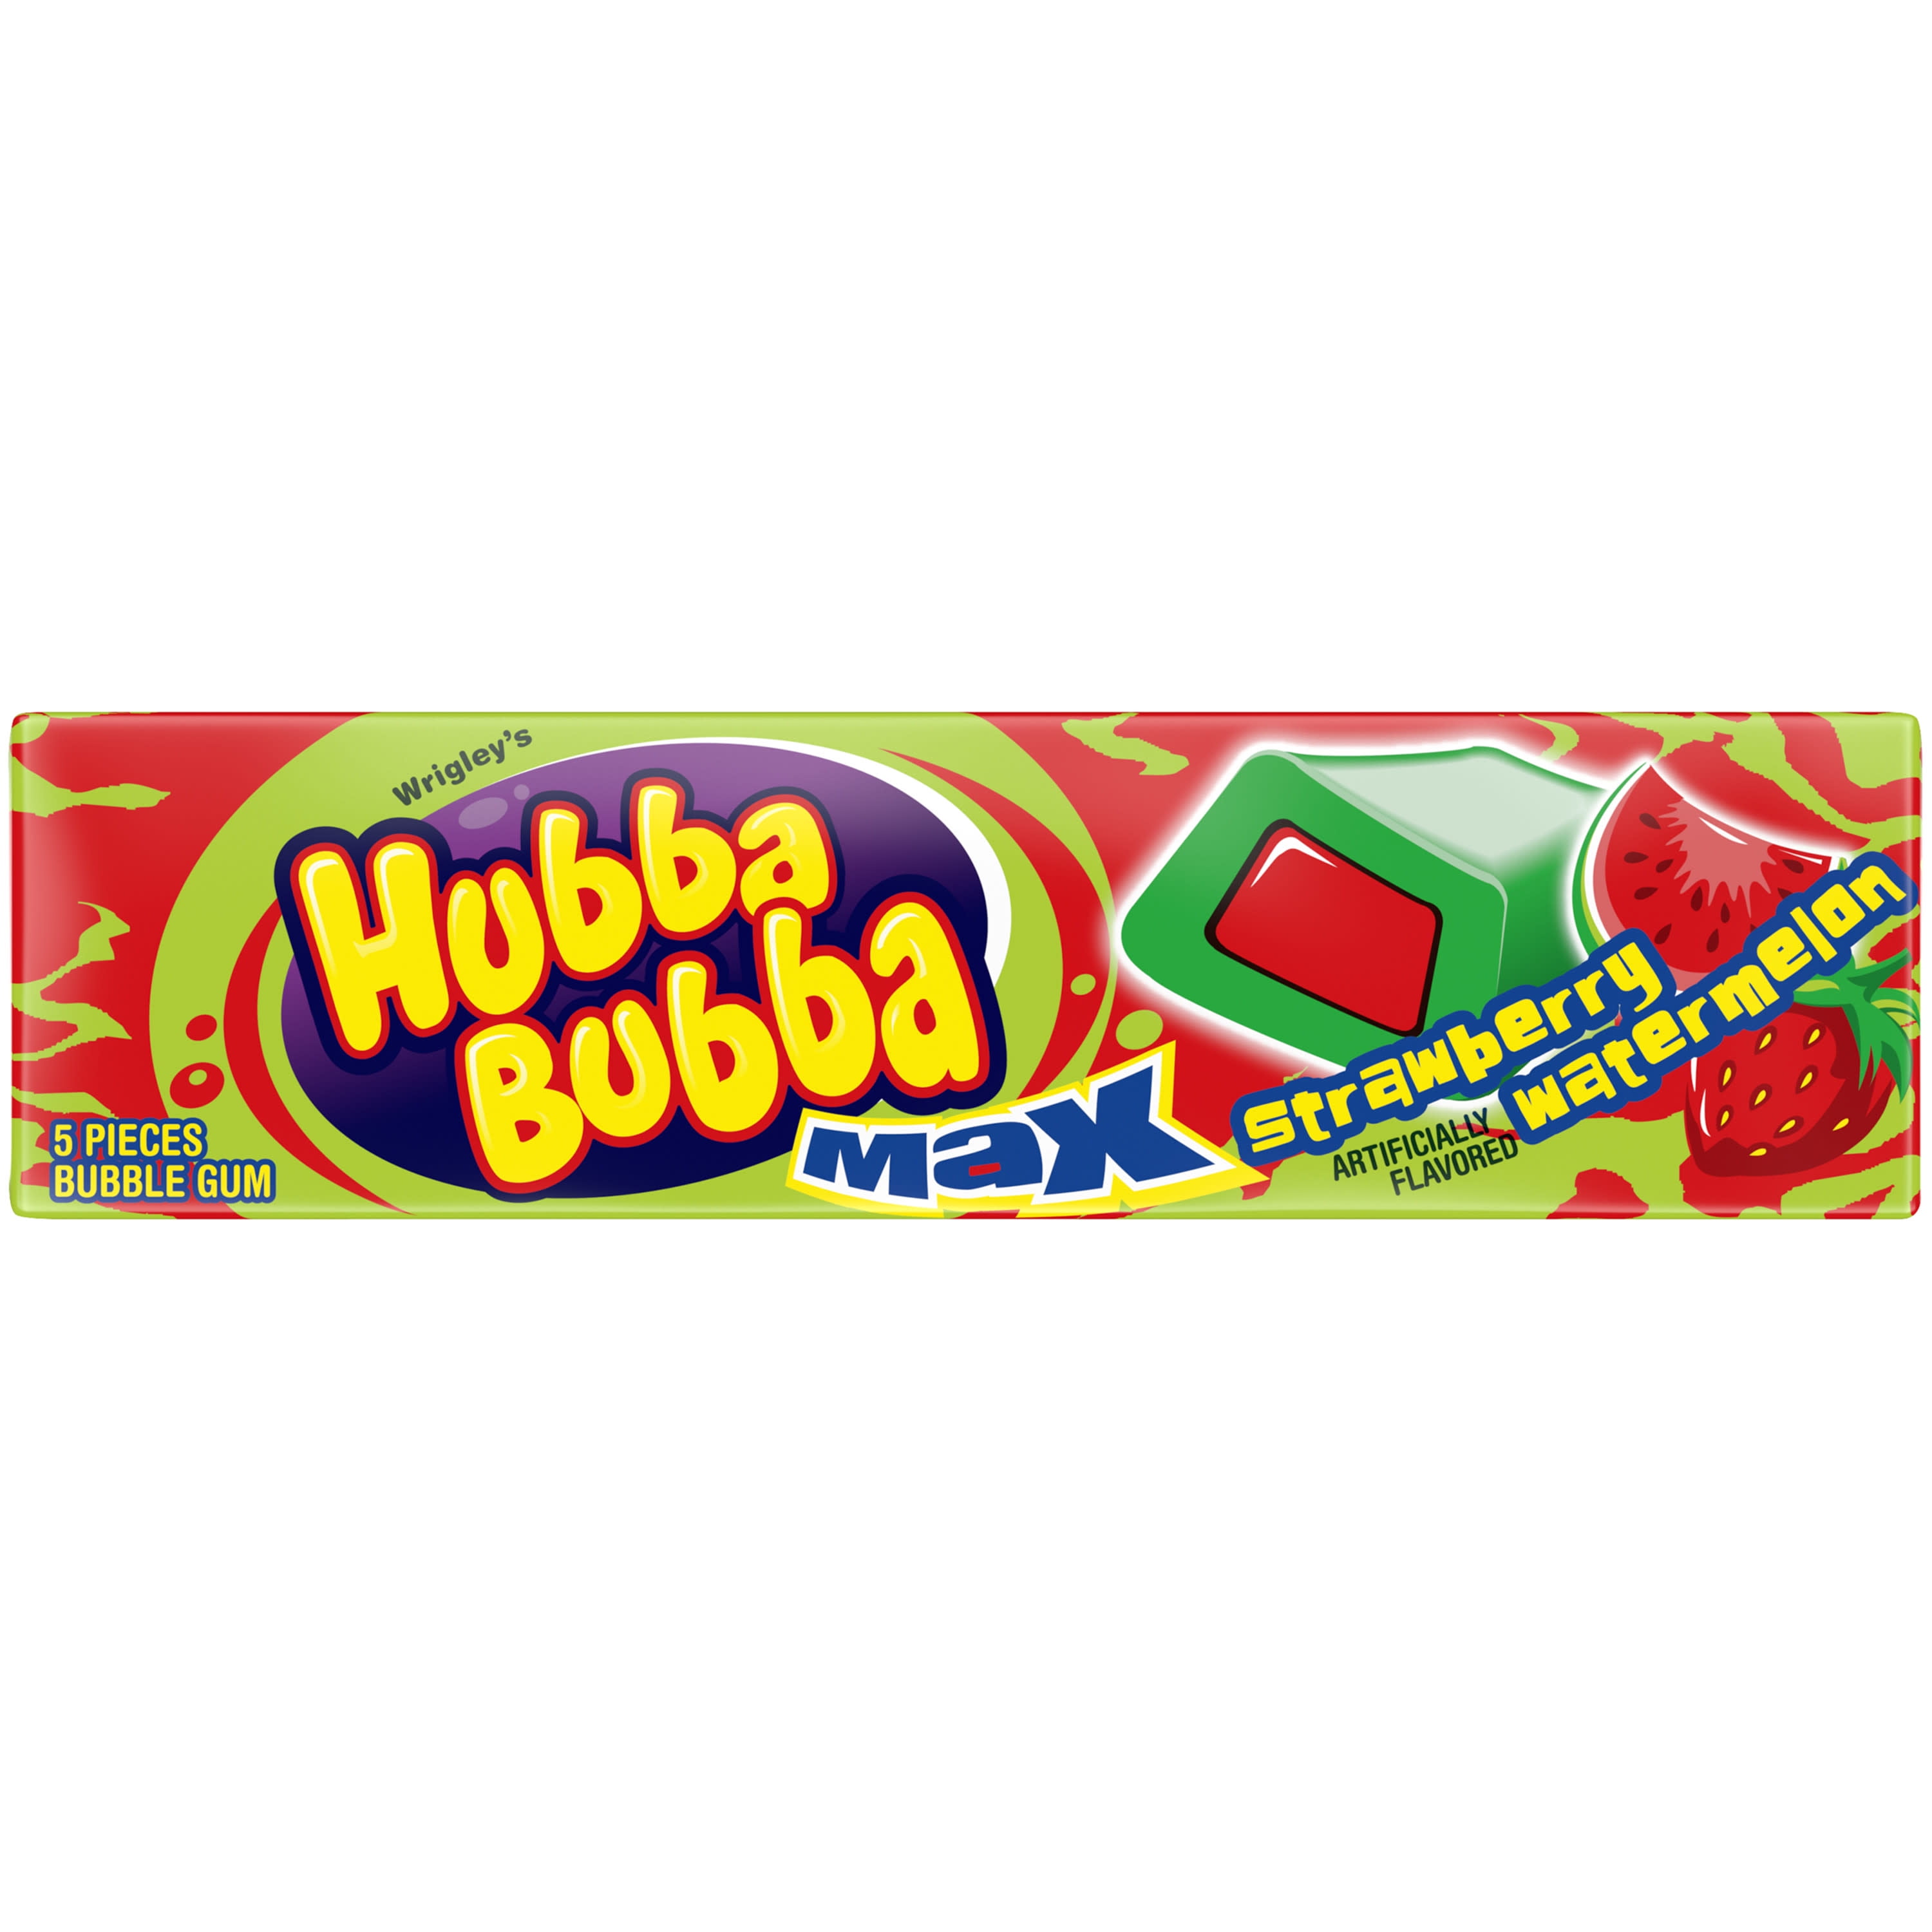 Hubba Bubba 20 Packs Of 5 STRAWBERRY Chewing Gum 100 x Party Birthday FULL  BOX